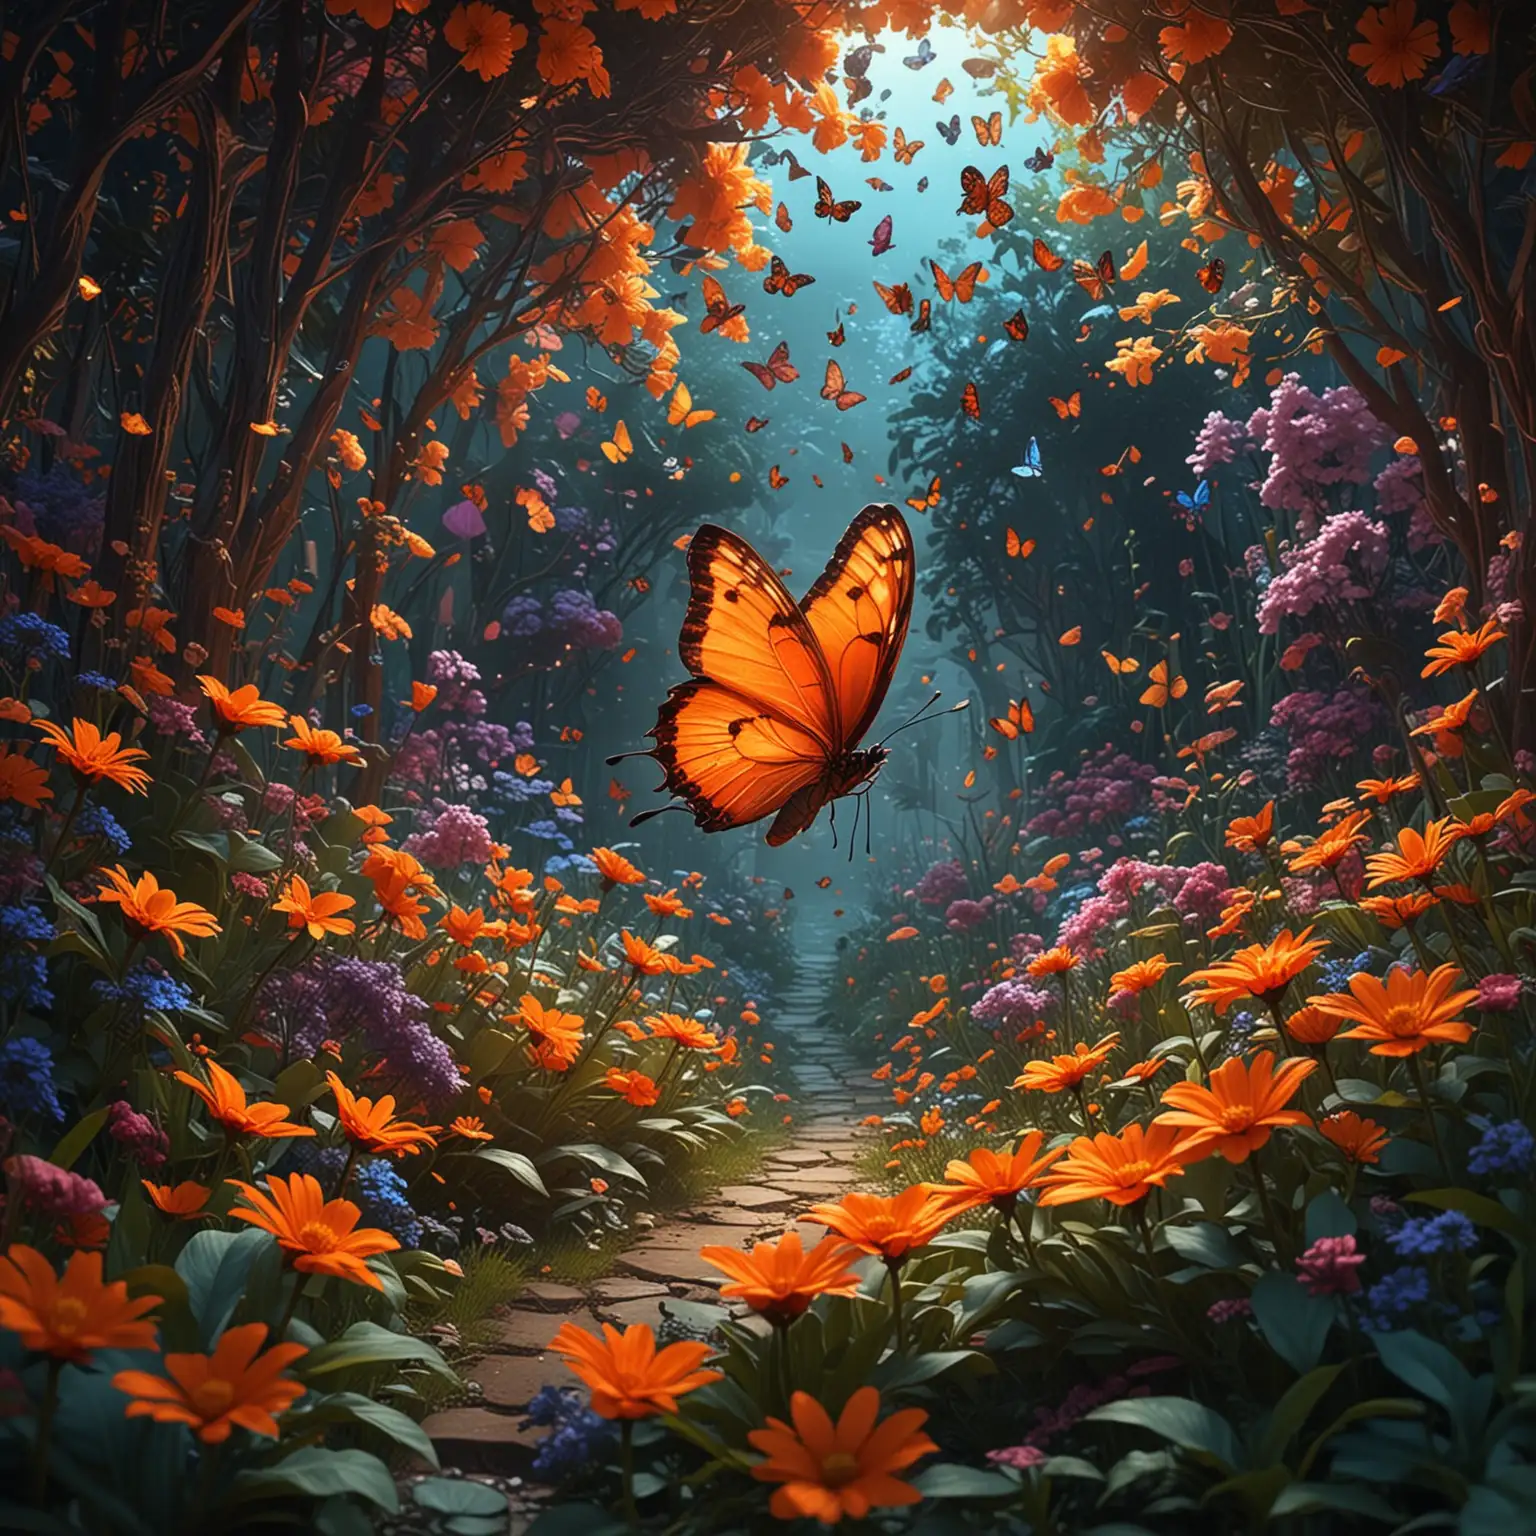 nirvana, there is an orange glowing butterfly, in front of him was a colorful garden full of flowers and butterflies, in the style of contemporary illustration, digital art, sci - fi, detailed and intricate environment, cinematic lighting, trending on artstation, hyper detailed

nirvana, there is an orange glowing butterfly, in front of him was a colorful garden full of flowers and butterflies, in the style of contemporary illustration and concept art, soft light, hdri, smooth, sharp focus, 8 k - tinted, wide - angle lens, award winning, pastel colors,

nirvana, there is an orange glowing butterfly, in front of him was a colorful garden full of flowers and butterflies, in the style of contemporary illustration and highly detailed concept art, digital art, cinematic lighting + hyperdetailed, trending on artstation, 8k, unreal engine 5, path traced, dramatic lighting, sharp focus, thin glowing wires, winning award

nirvana, there is an orange glowing butterfly, in front of him was a colorful garden full of flowers and butterflies, in the style of contemporary illustration, digital art, trending on instagram, A masterpiece, highly detailed, intricate, sci-fi shot, dynamic lighting, golden ratio, sharp focus, concept art, digital art, fantasy, neon, artstation, by WLOP and James Jean and Victo Ngai
